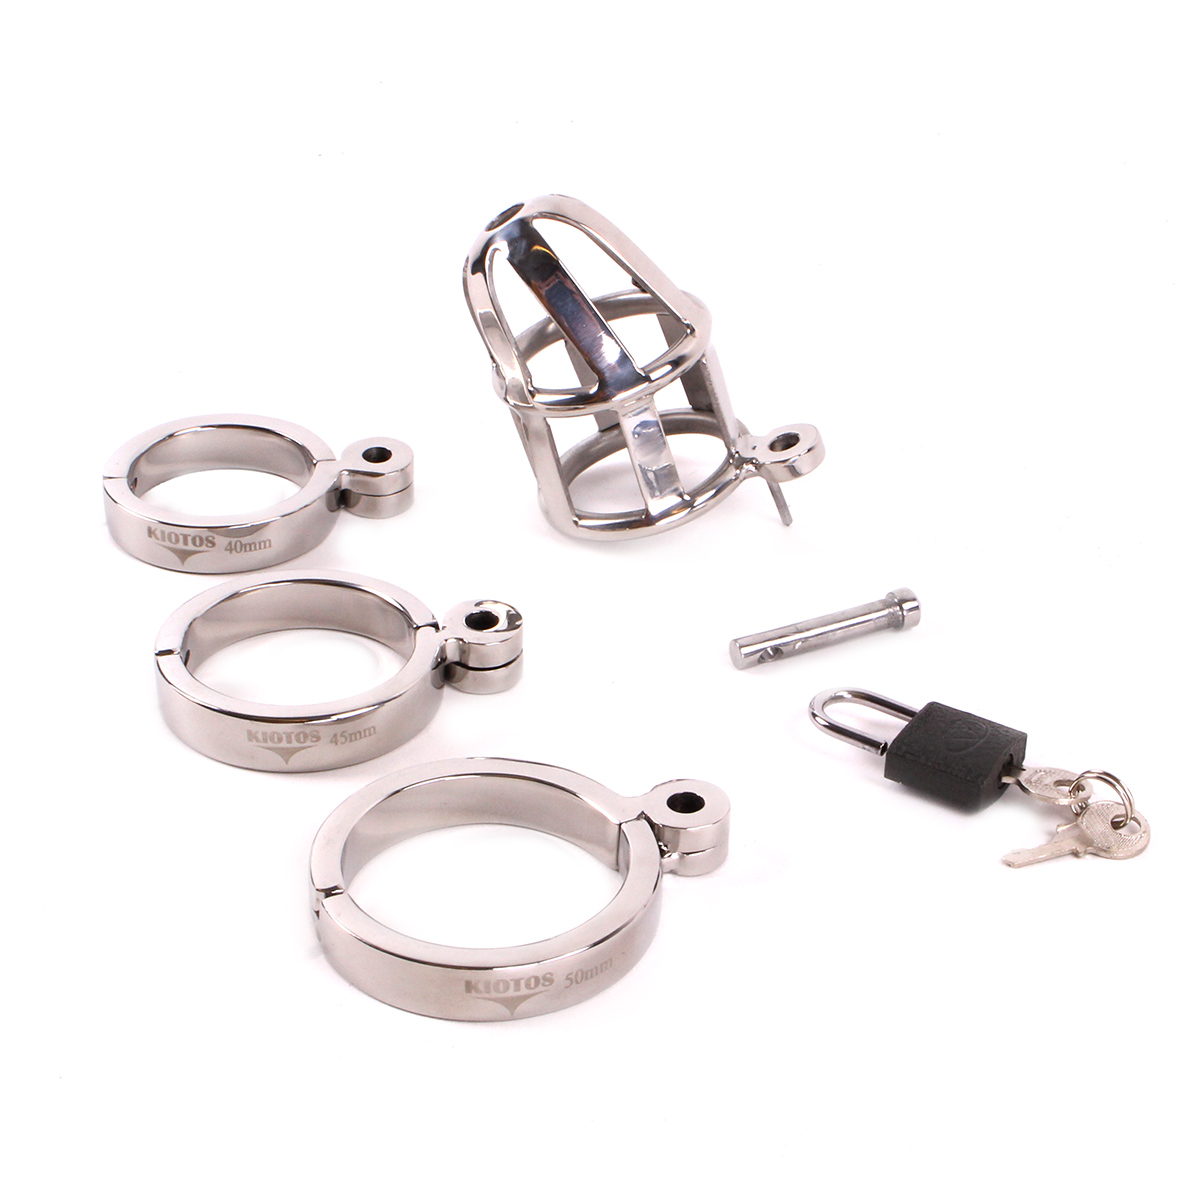 Chastity-Cage-DeLuxe-6.5-cm-OPR-277025-1